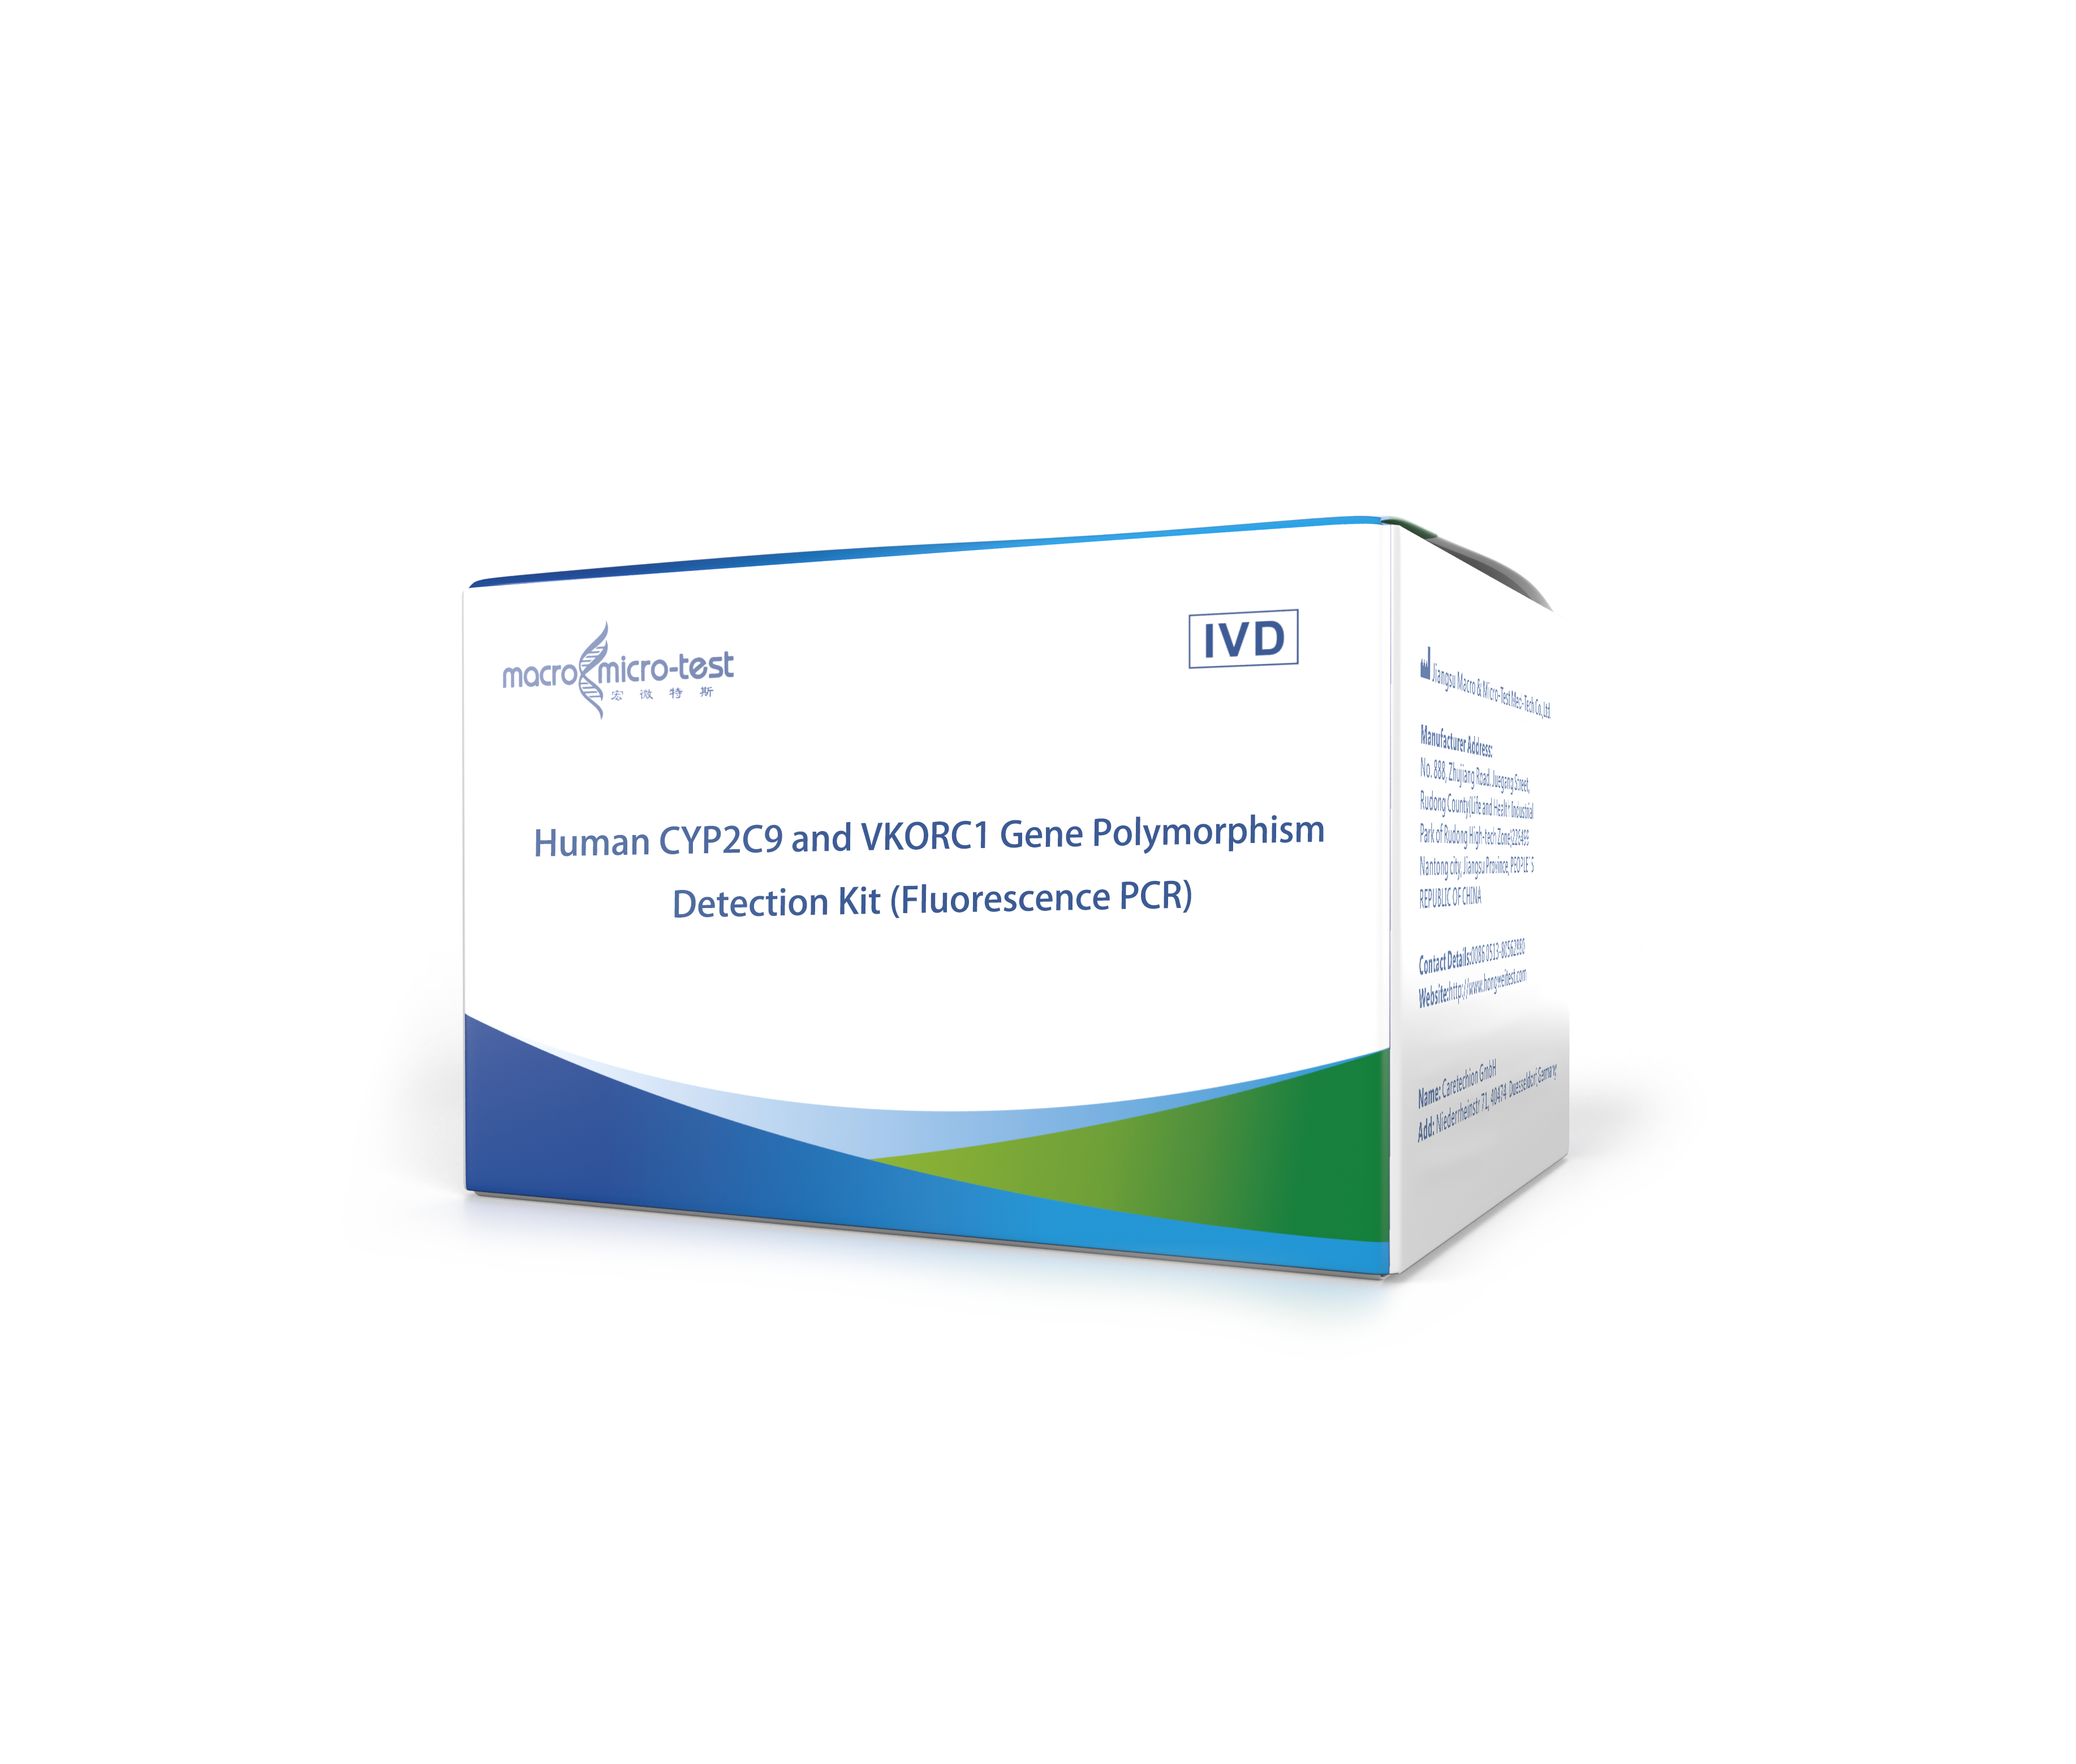 Human CYP2C9 and VKORC1 Gene Polymorphism Detection Kit (Fluorescence PCR)